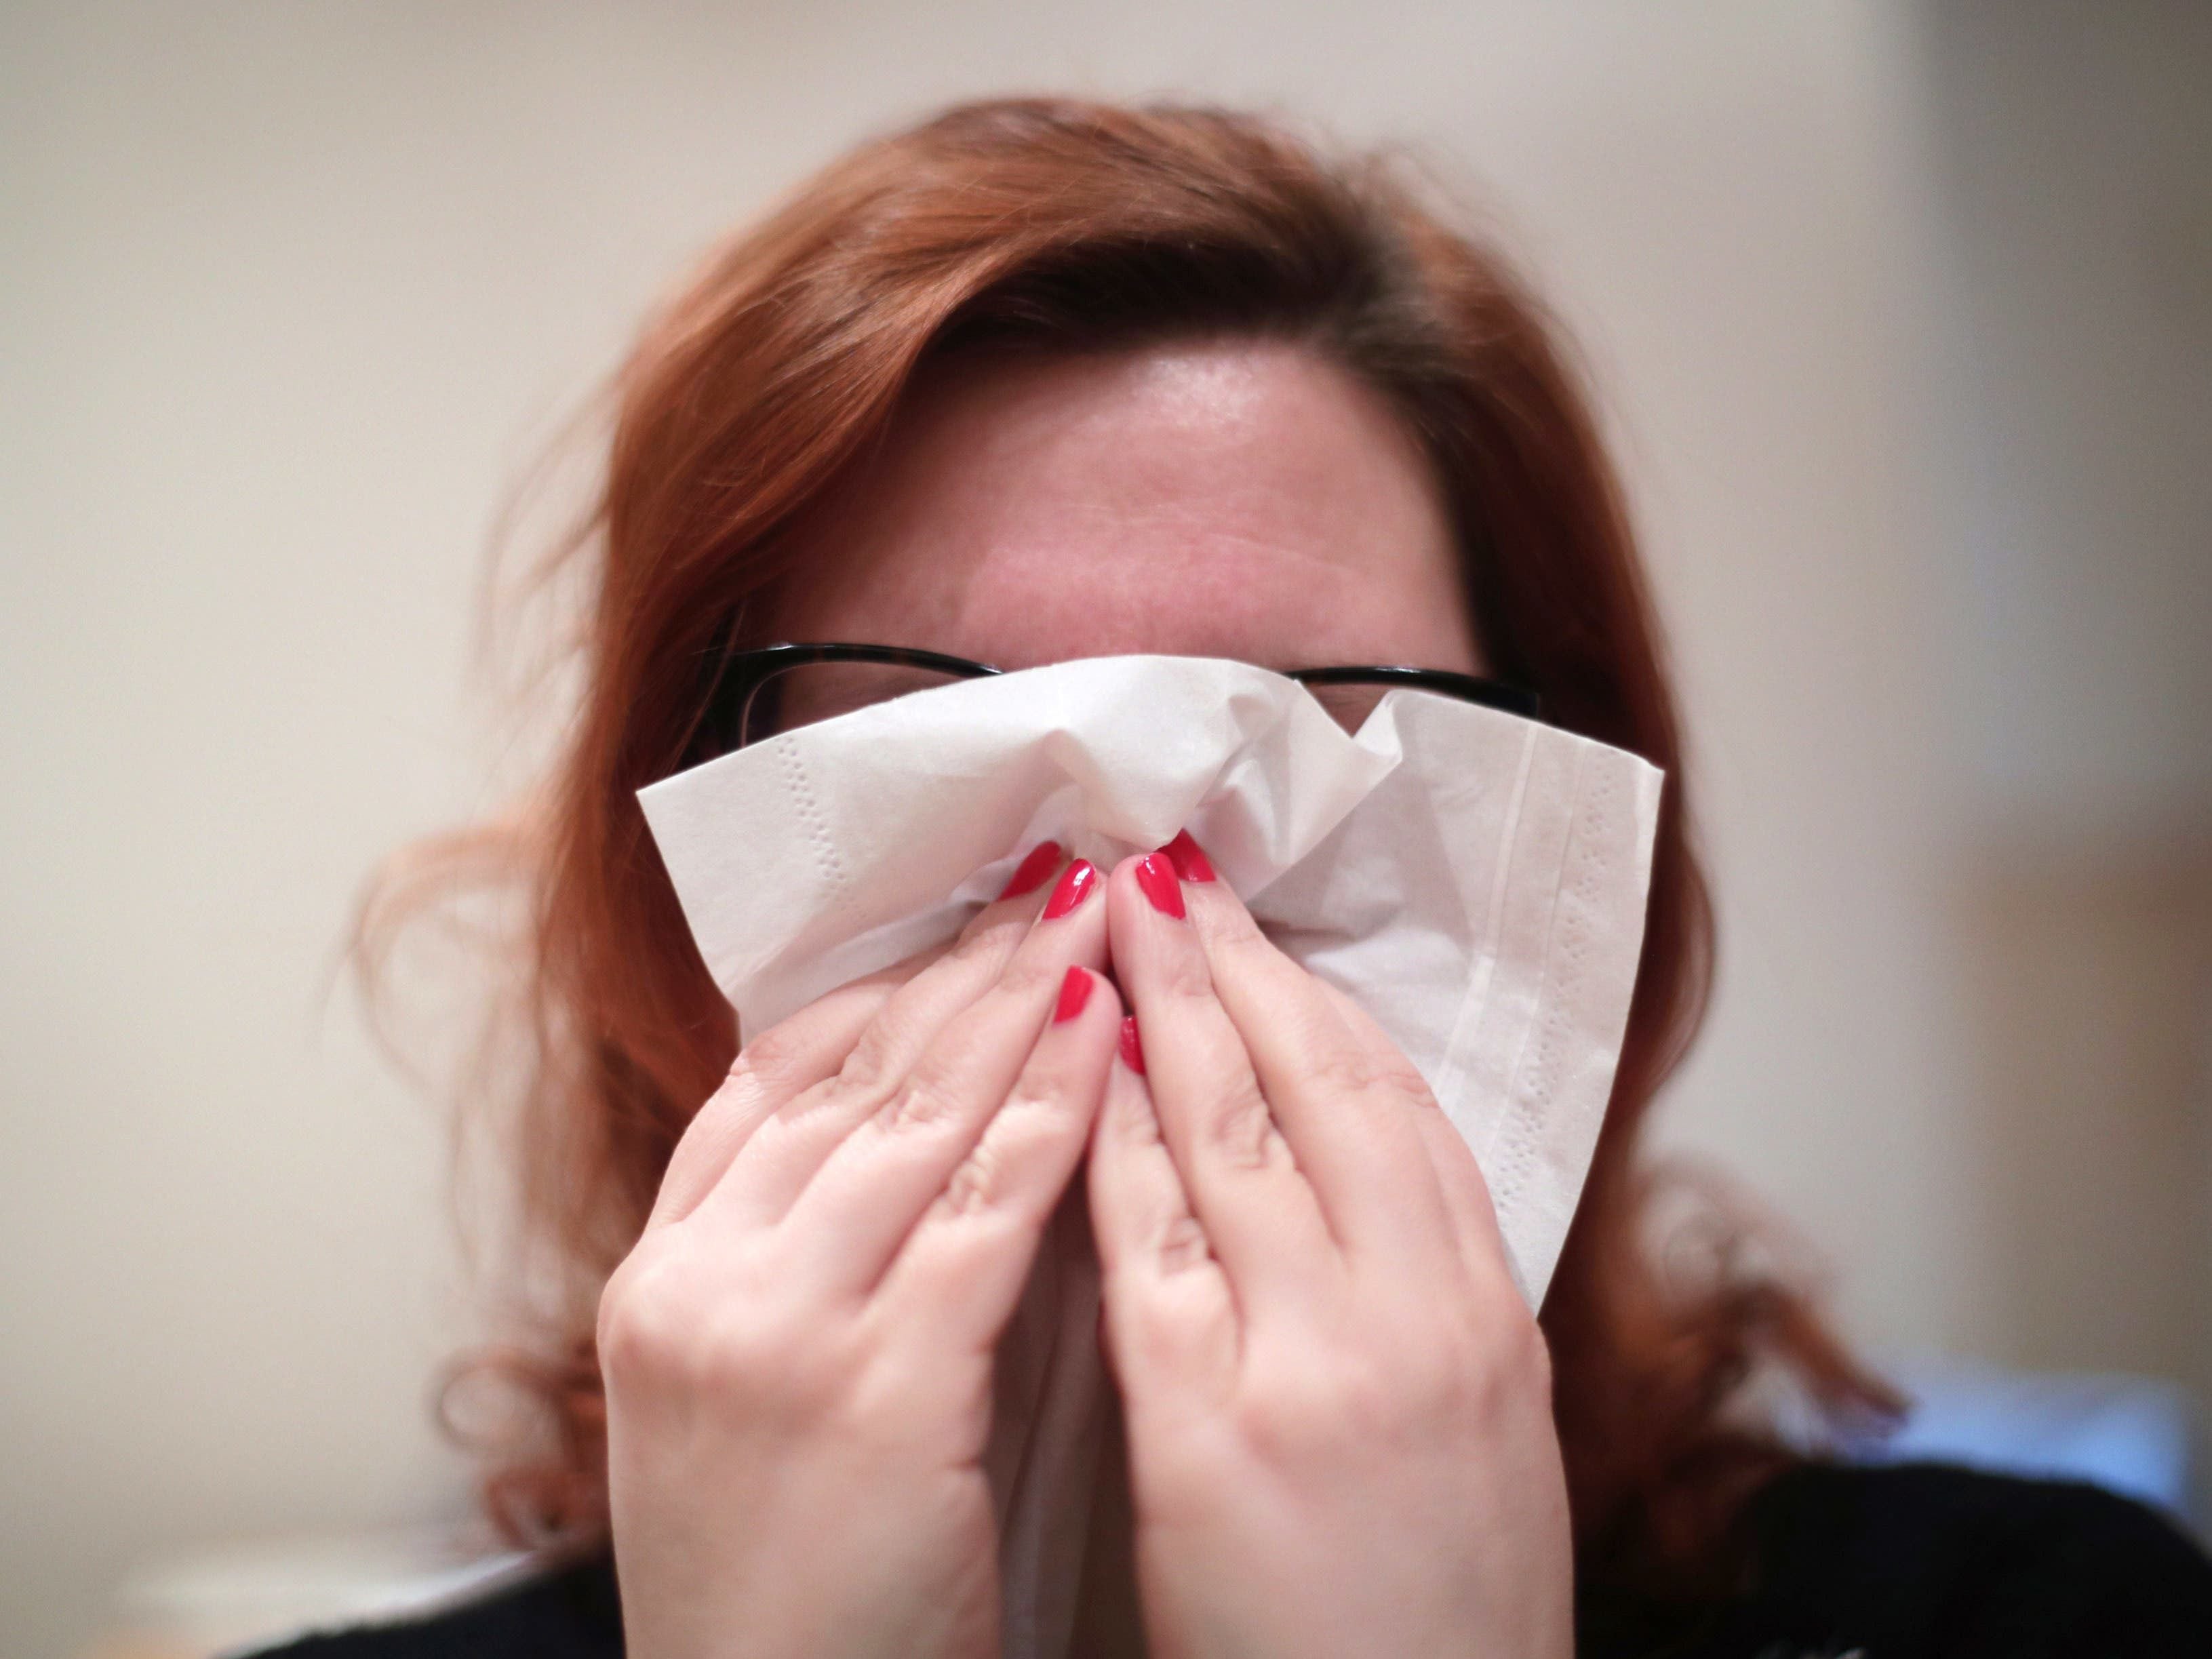 Over-the-counter nasal sprays may keep coughs, colds and flu at bay, trial shows